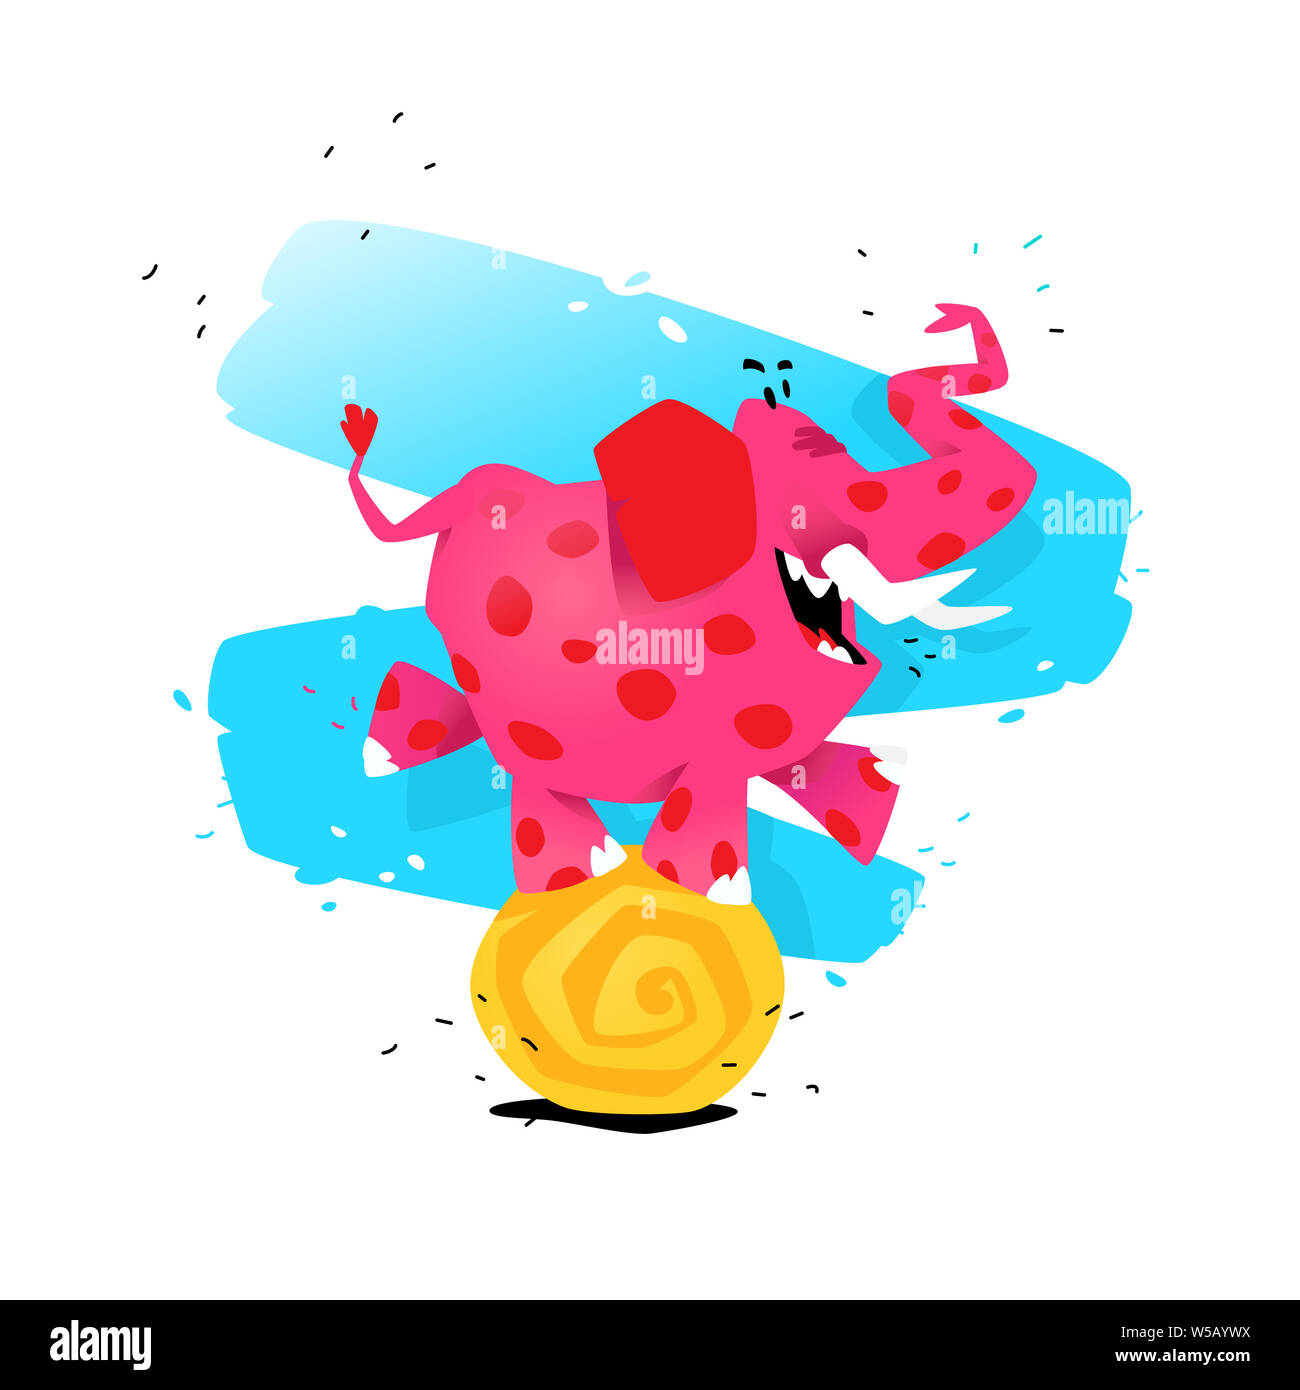 Illustration of a cartoon pink elephant on a ball. Vector illustration. Image is isolated on white background. Illustration for a banner, congratulati Stock Photo